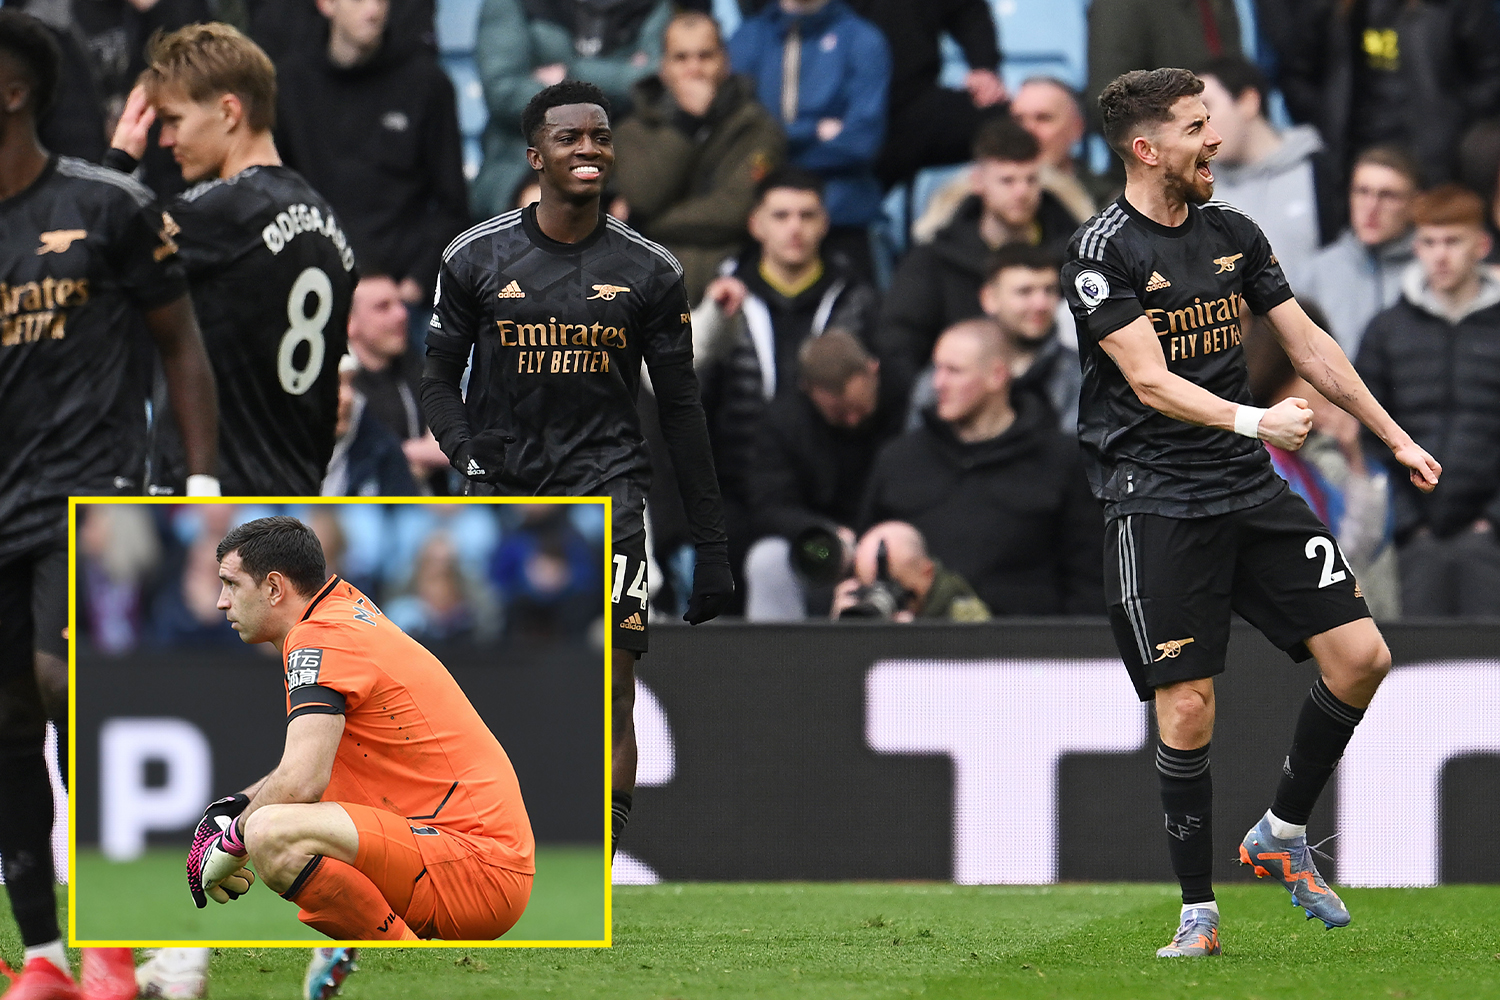 'It's poor to see' - Arsenal and Aston Villa staff clash in the stands after Gunners analysts 'celebrated wildly' following Emi Martinez own goal as Mikel Arteta promises to 'take action' after Miguel Molina was kicked out of stadium